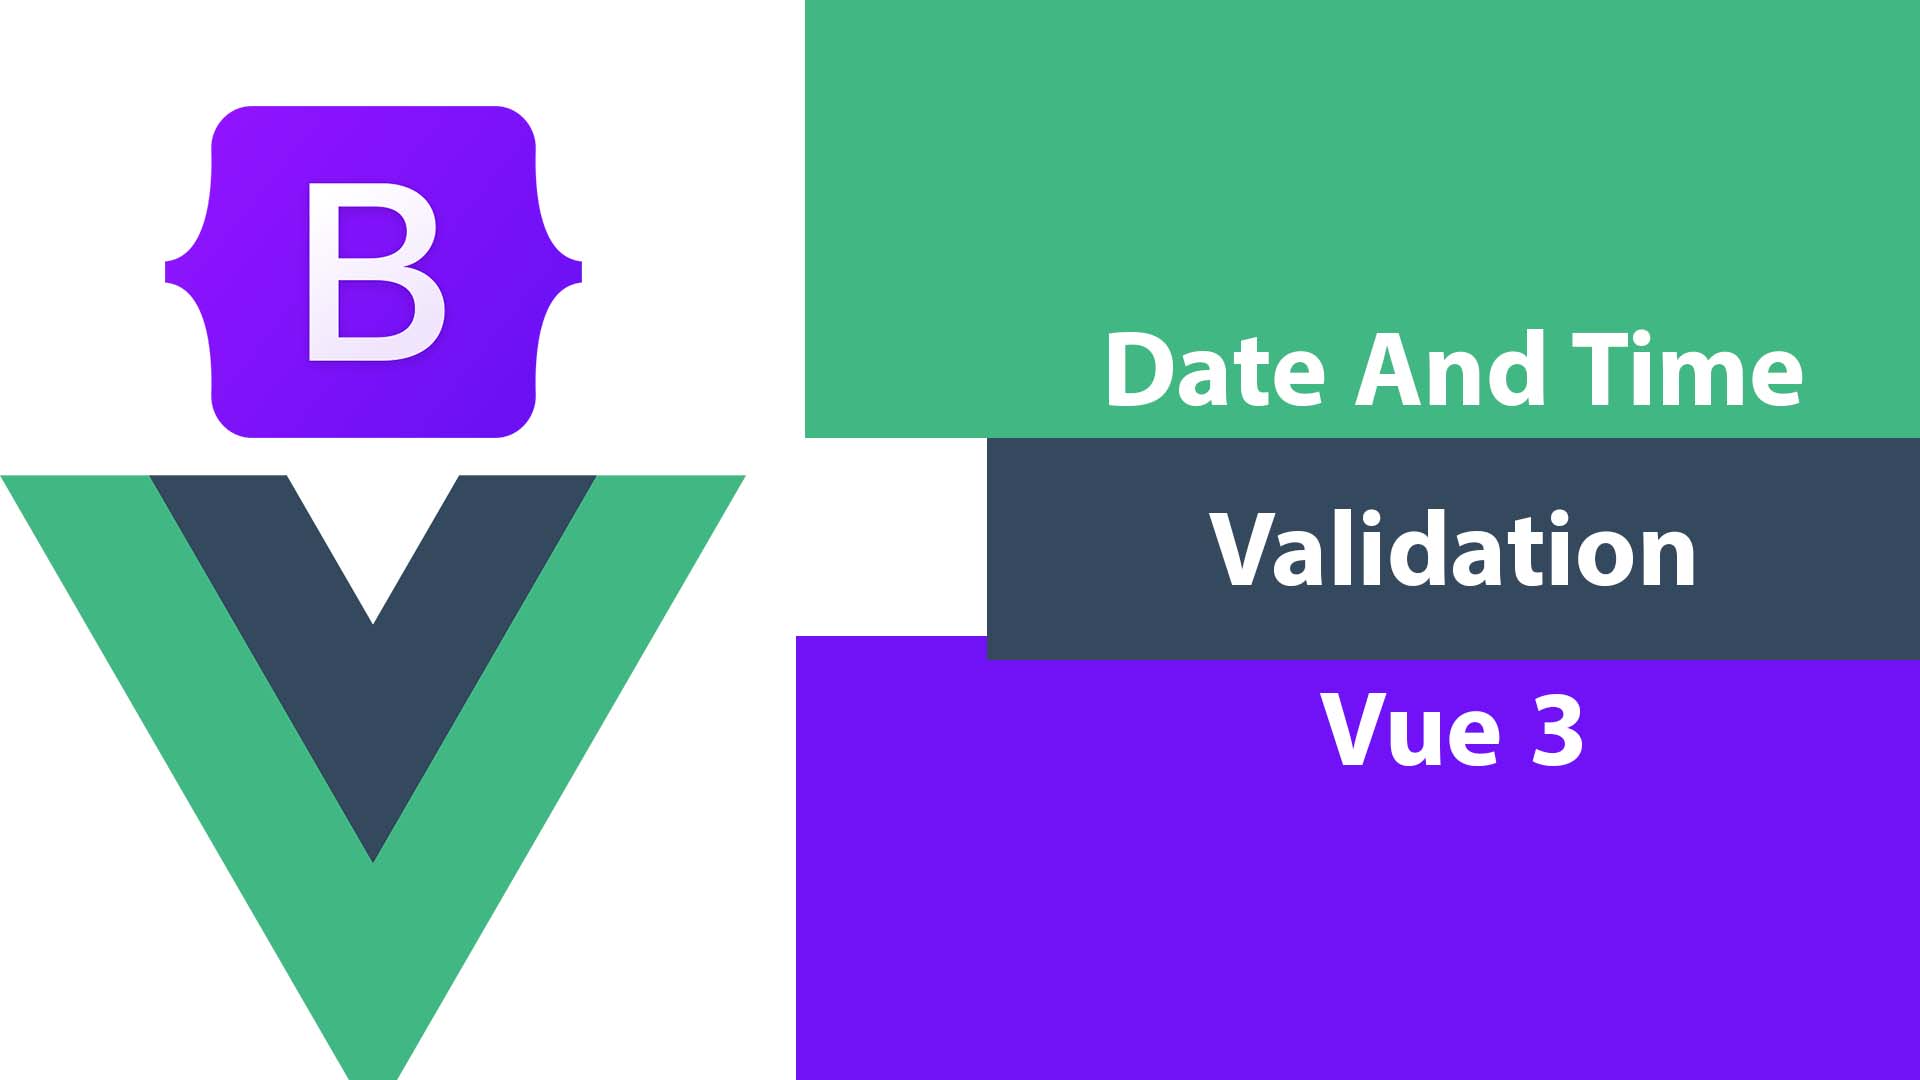 Vuelidate Date And Time Validation Example